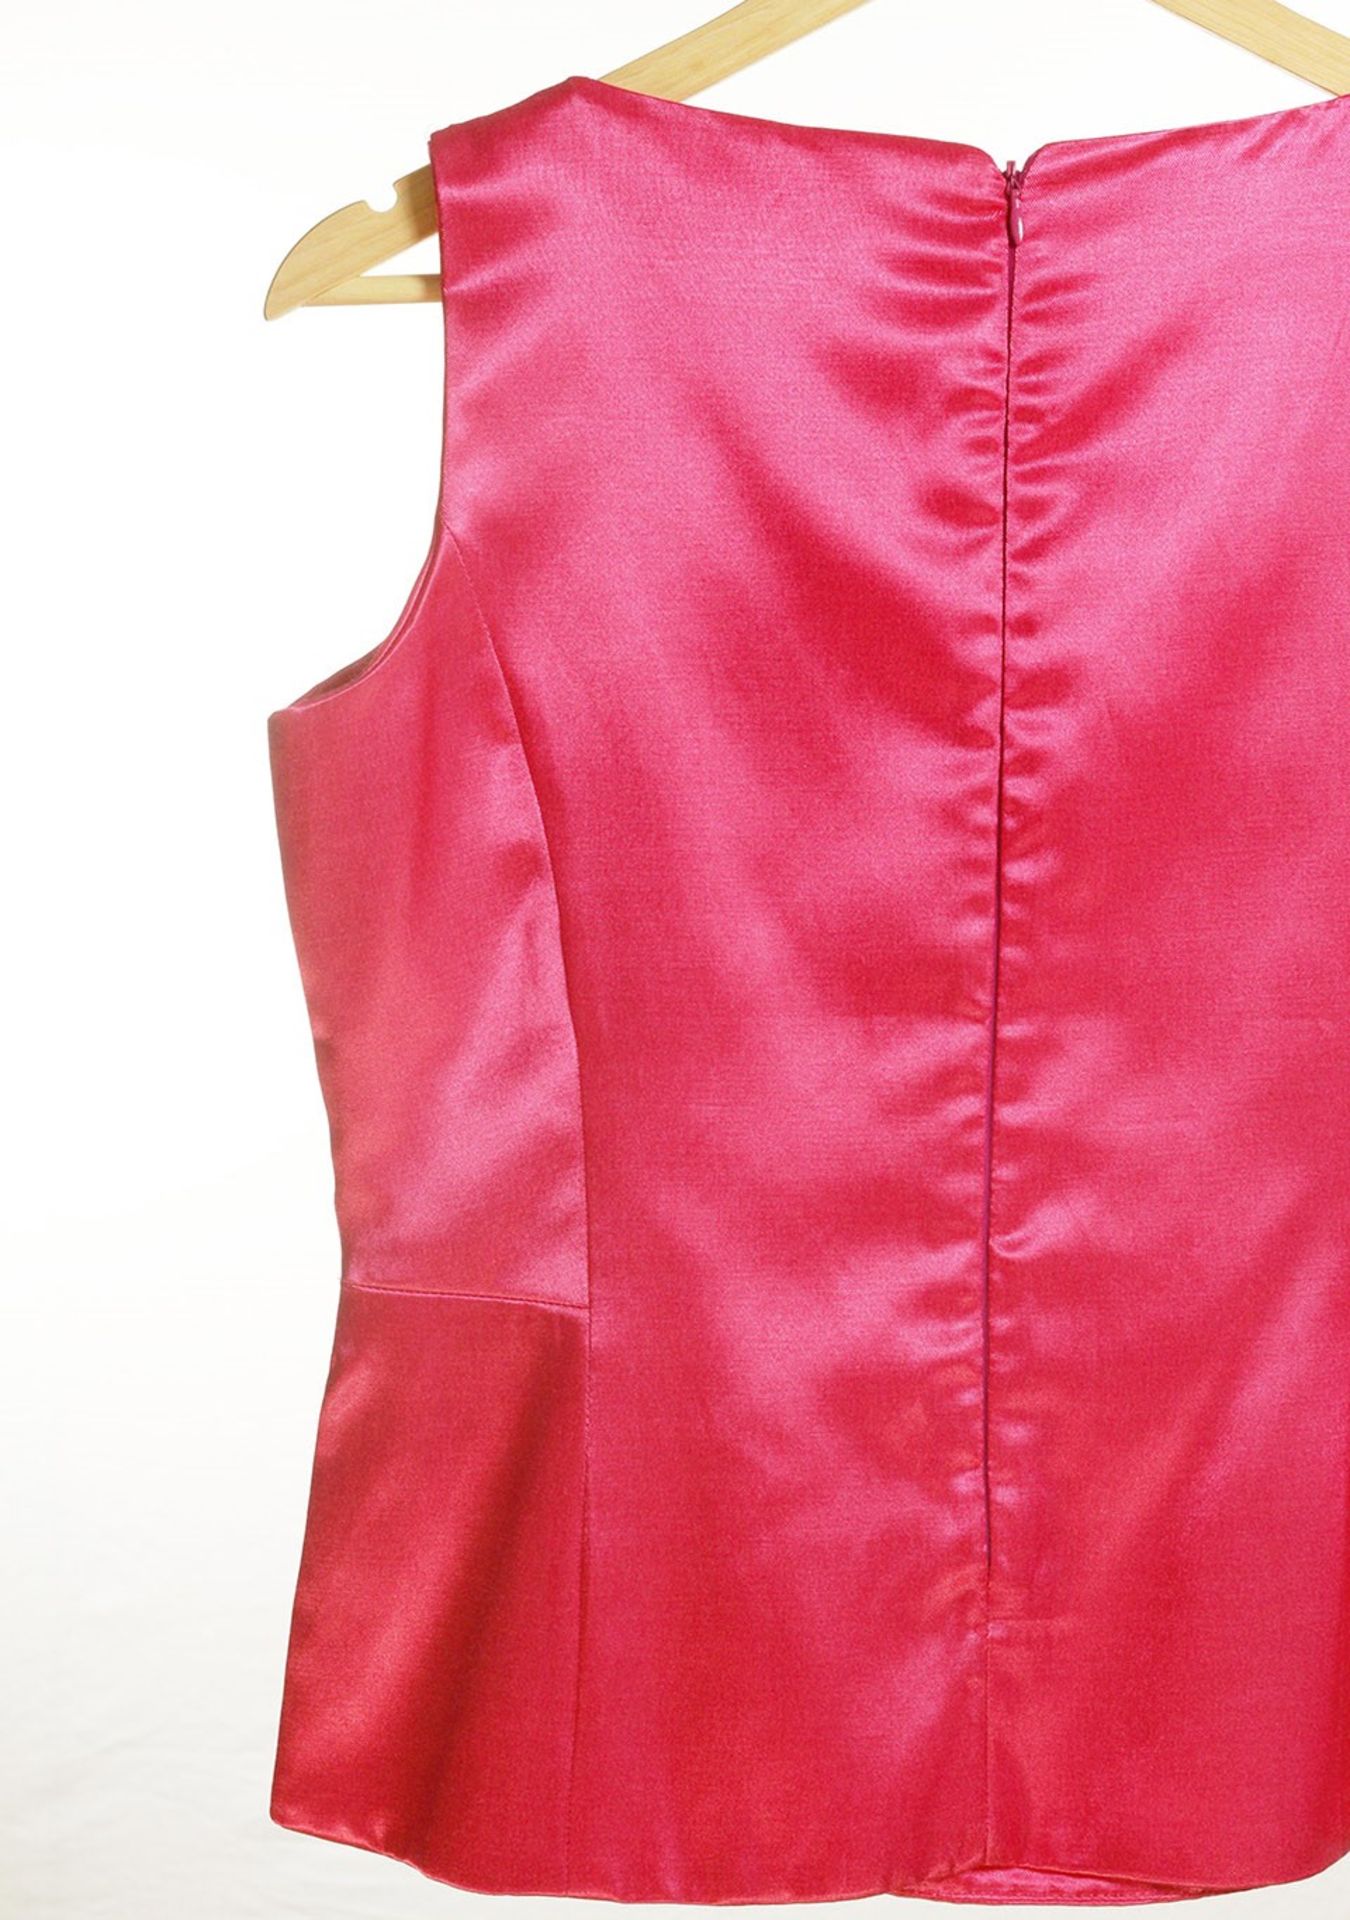 1 x Boutique Le Duc Fuschia Vest - From a High End Clothing Boutique In The - Image 5 of 10